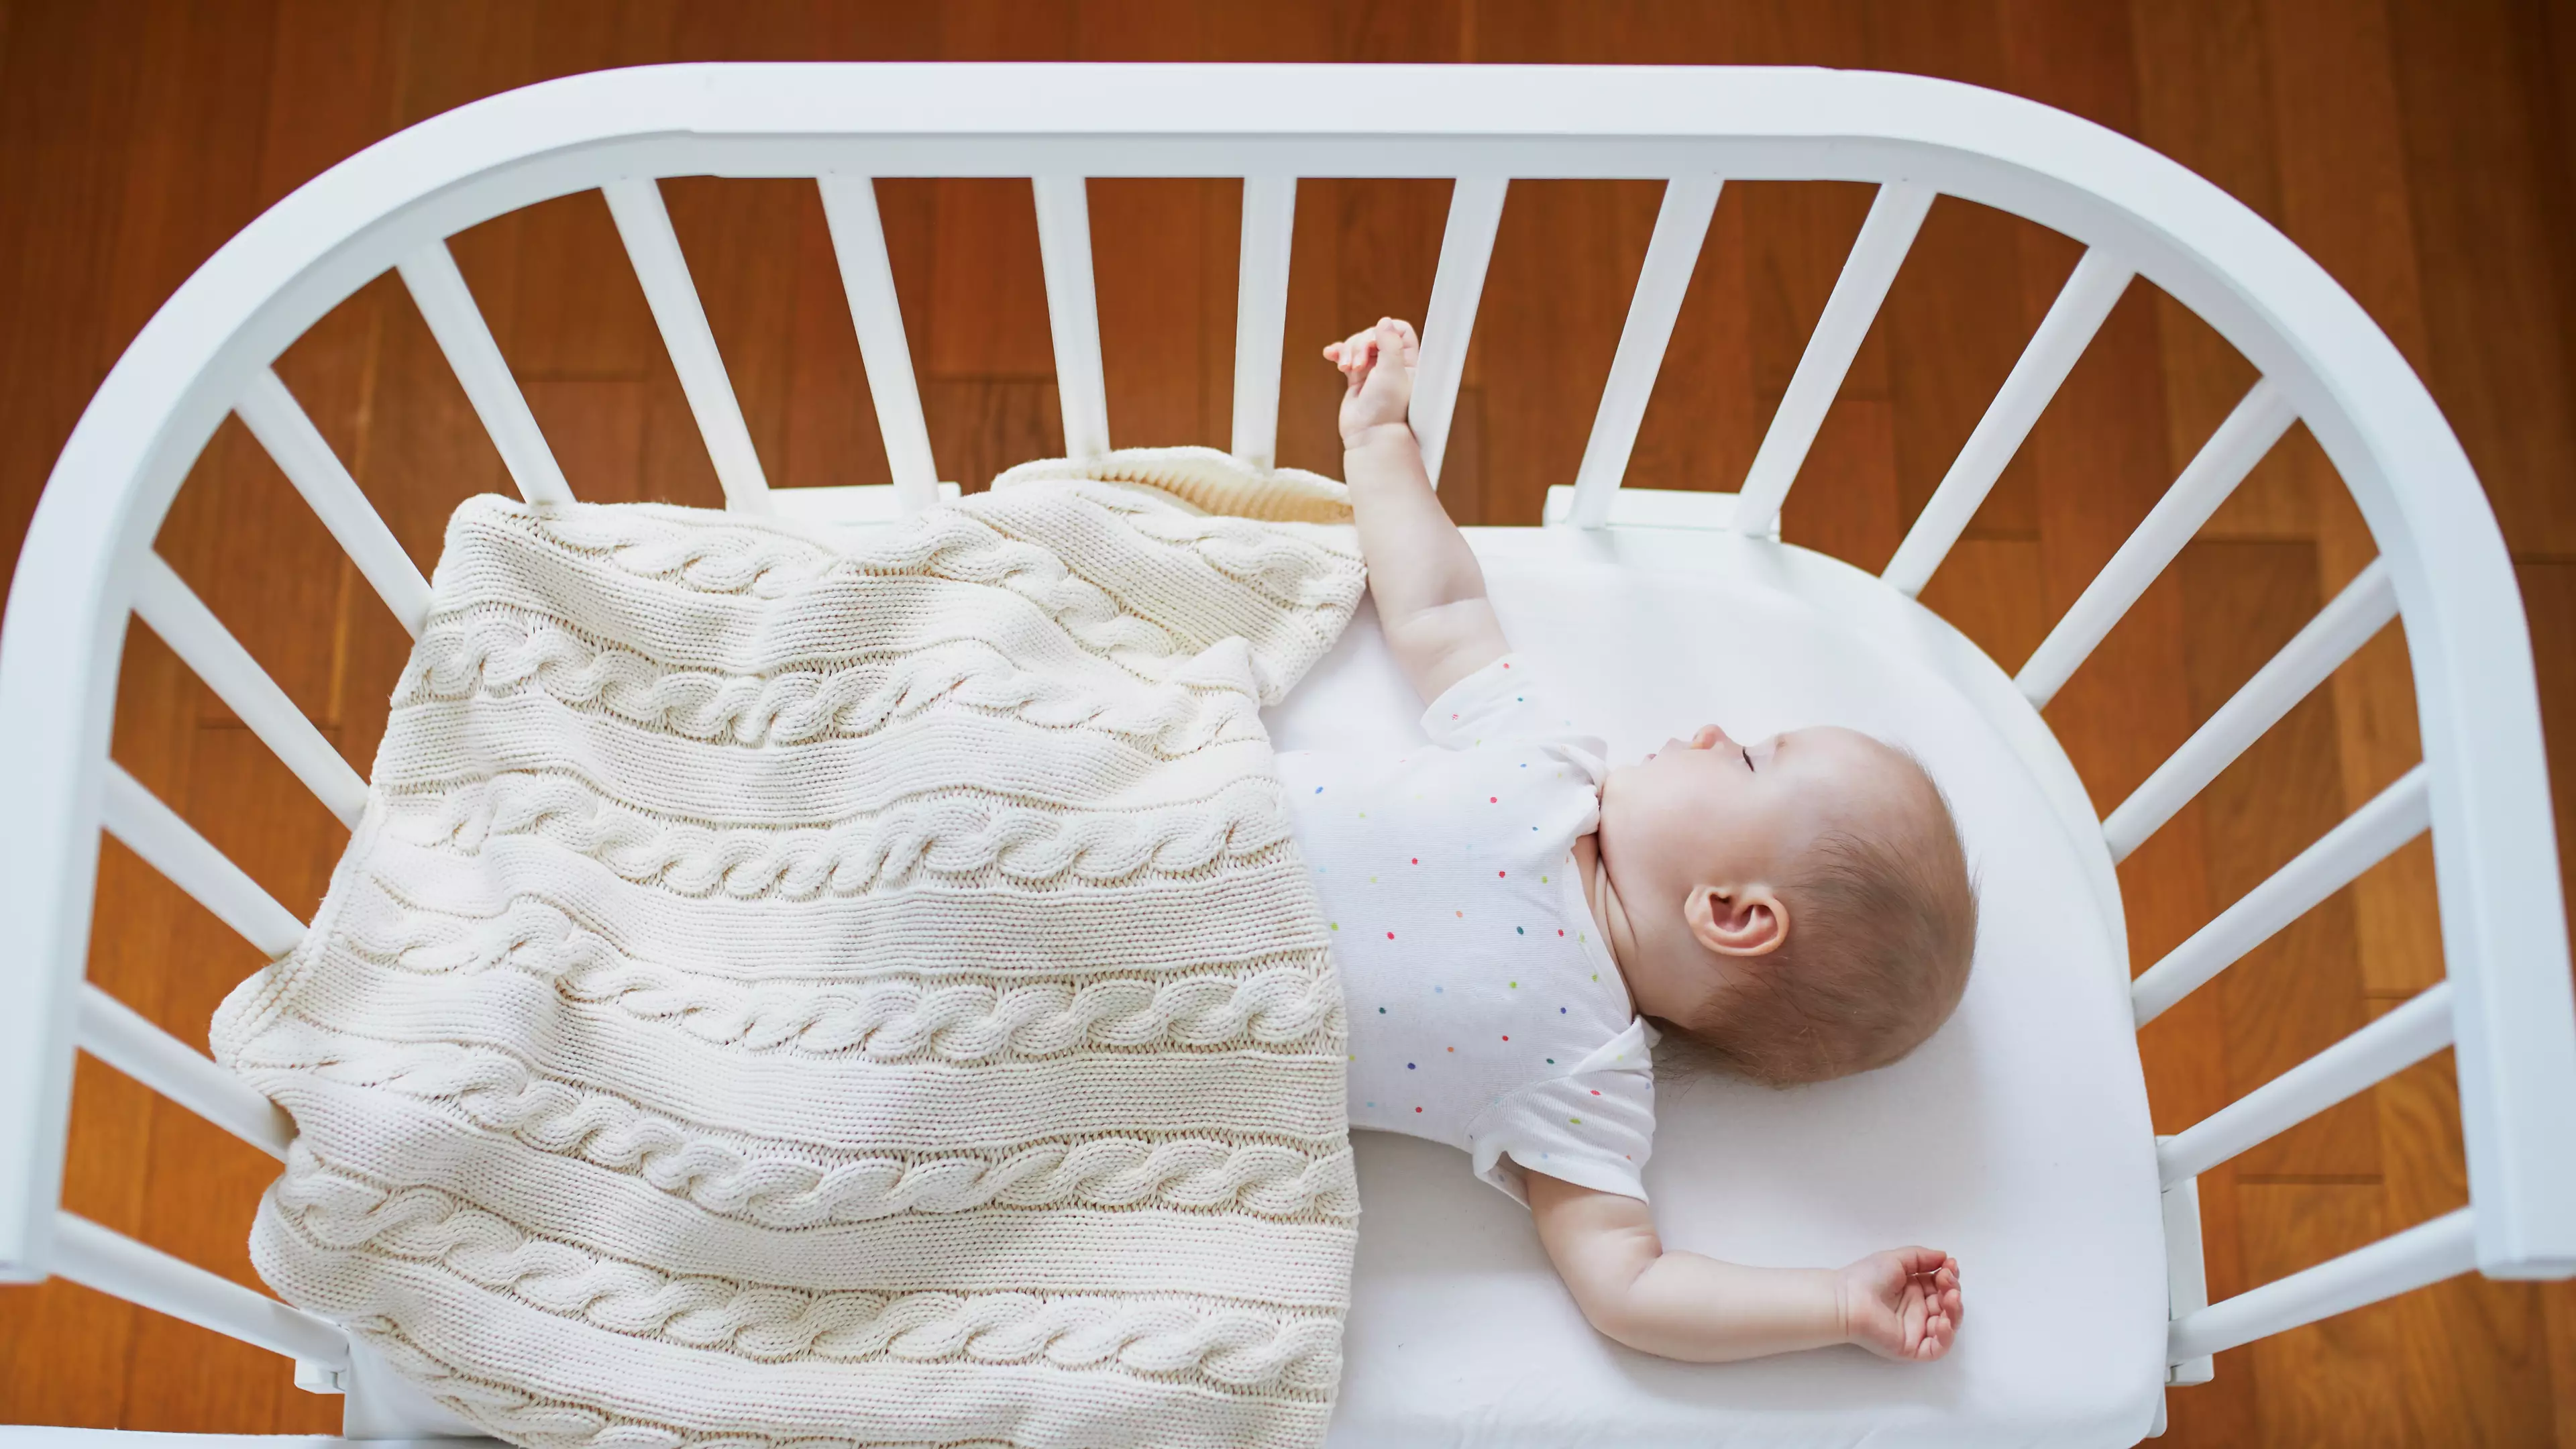 TikTok Video Warns Parents Not To Leave Blanket In Their Baby’s Reach When Sleeping